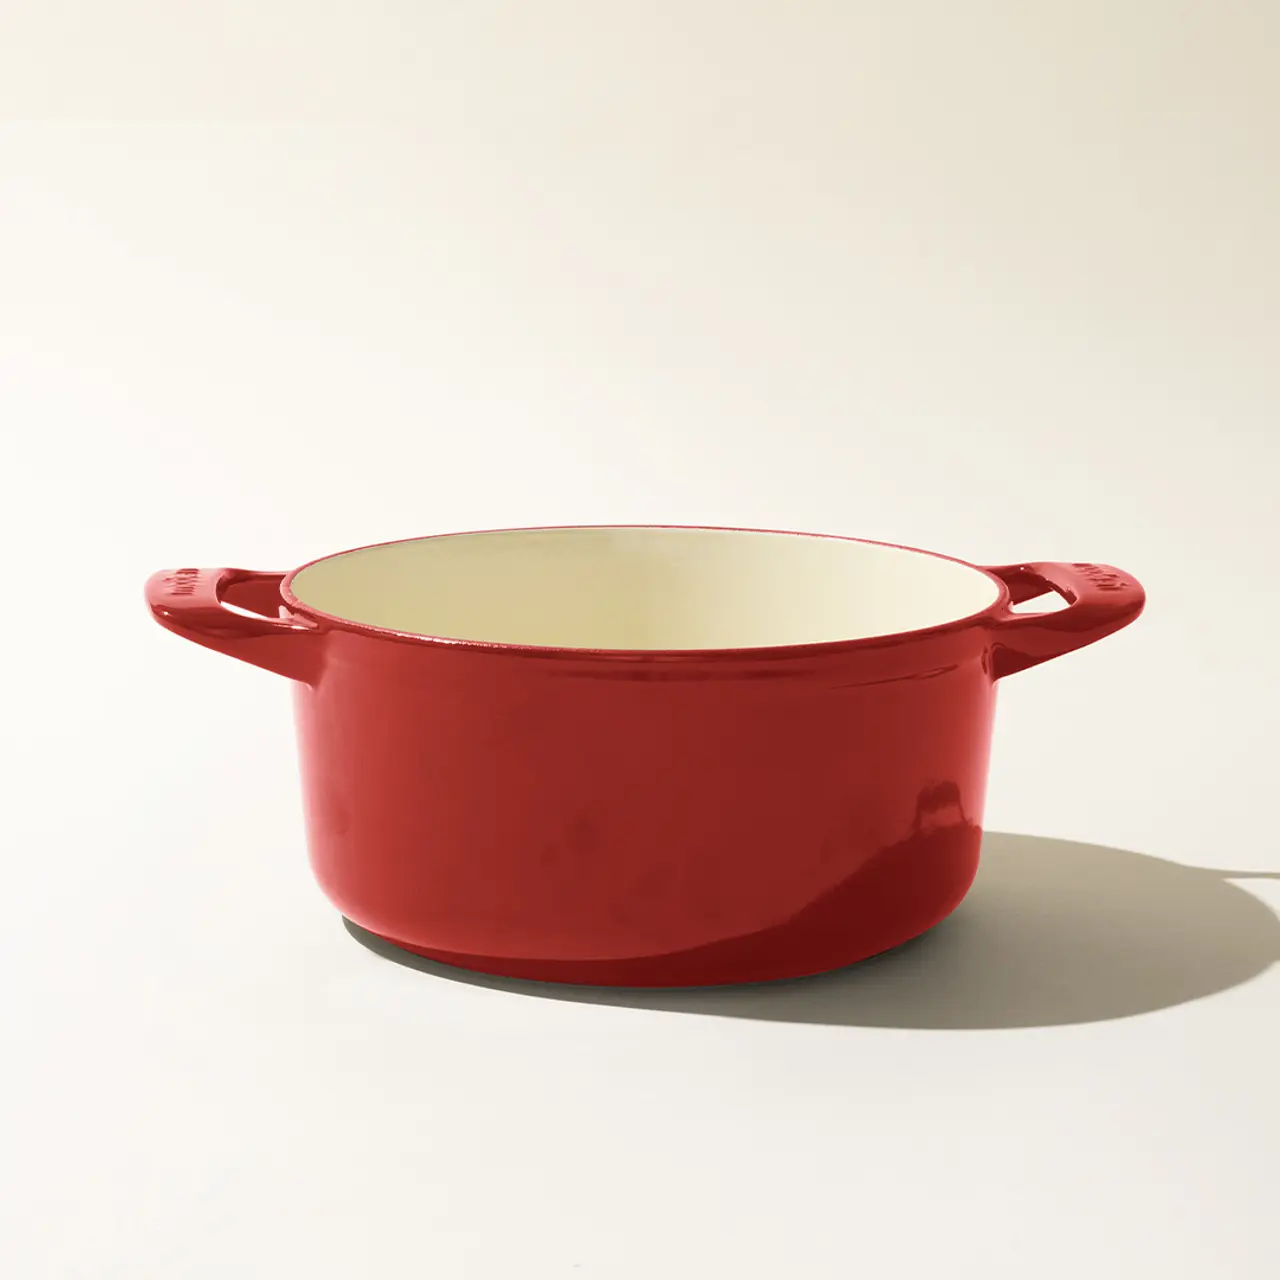 A red enameled cast iron Dutch oven with handles on a neutral background.